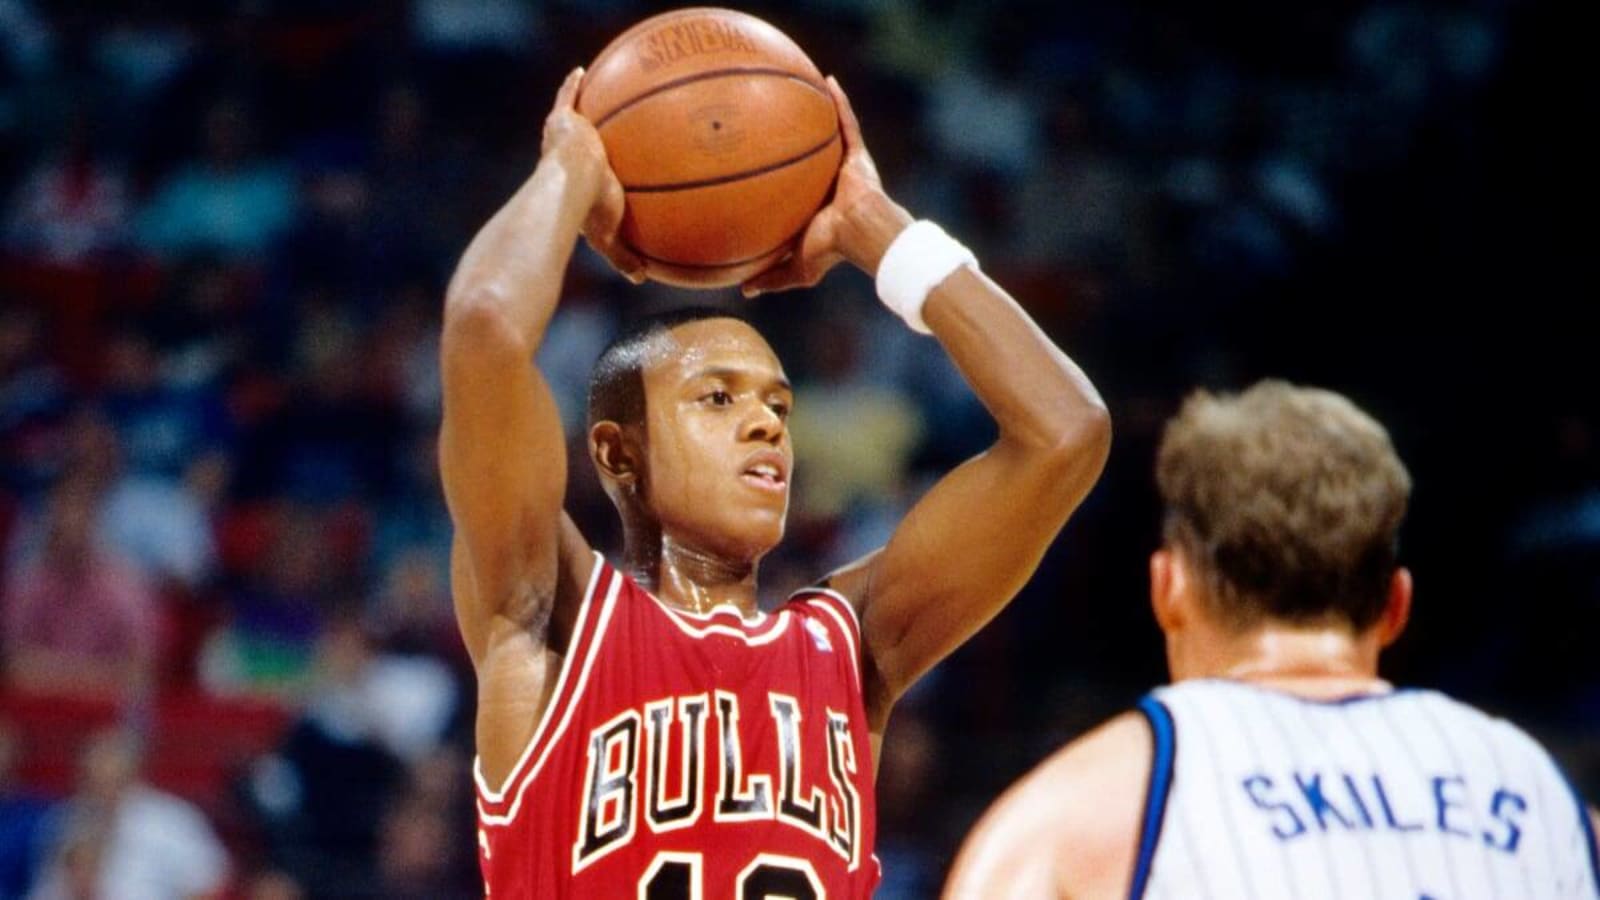 When B.J. Armstrong swore to never pass the ball to Michael Jordan in 1991